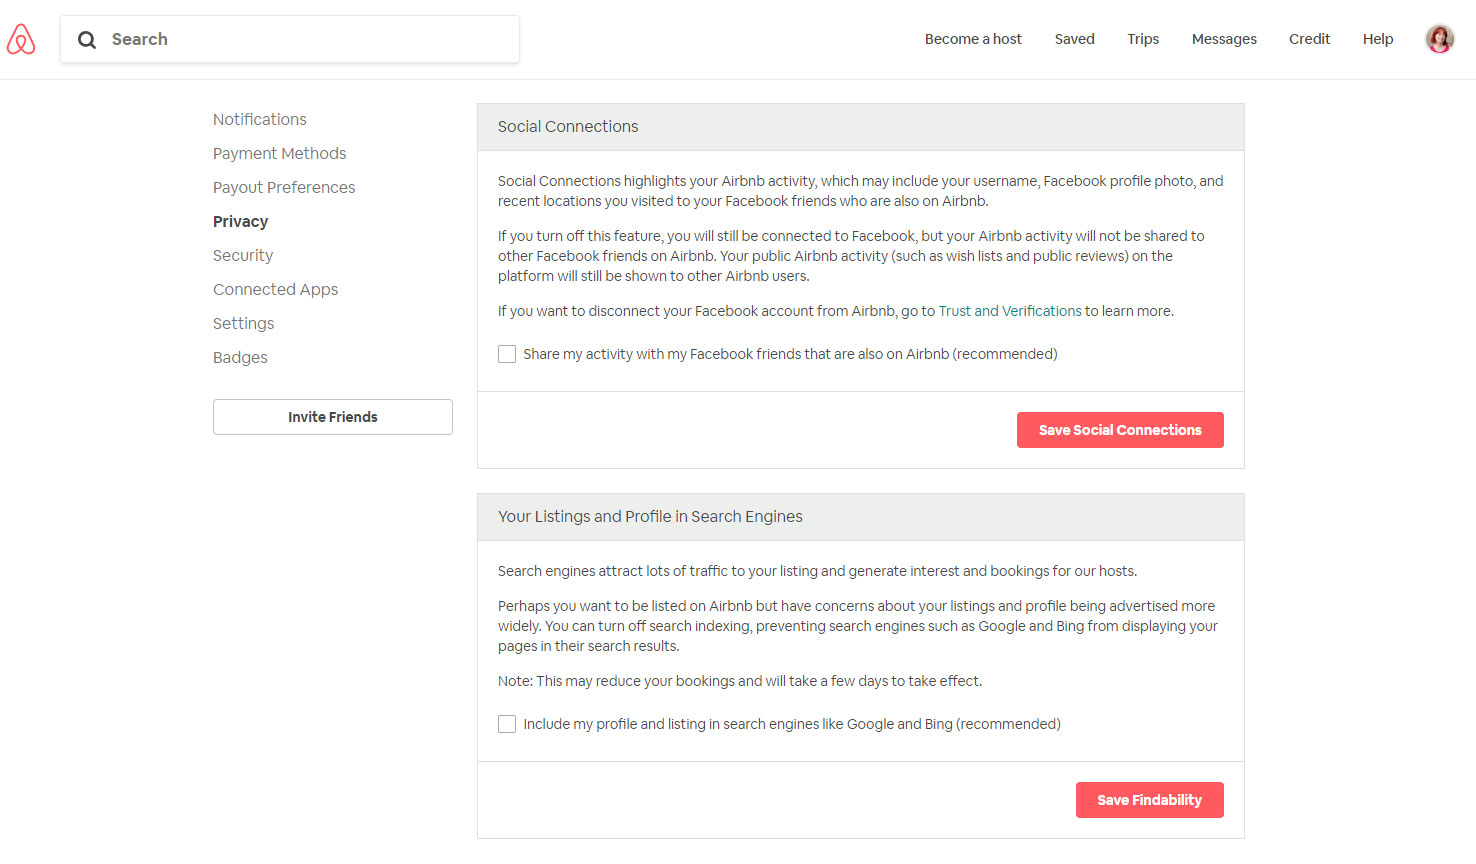 Airbnb account settings with privacy boxes pre-ticked.